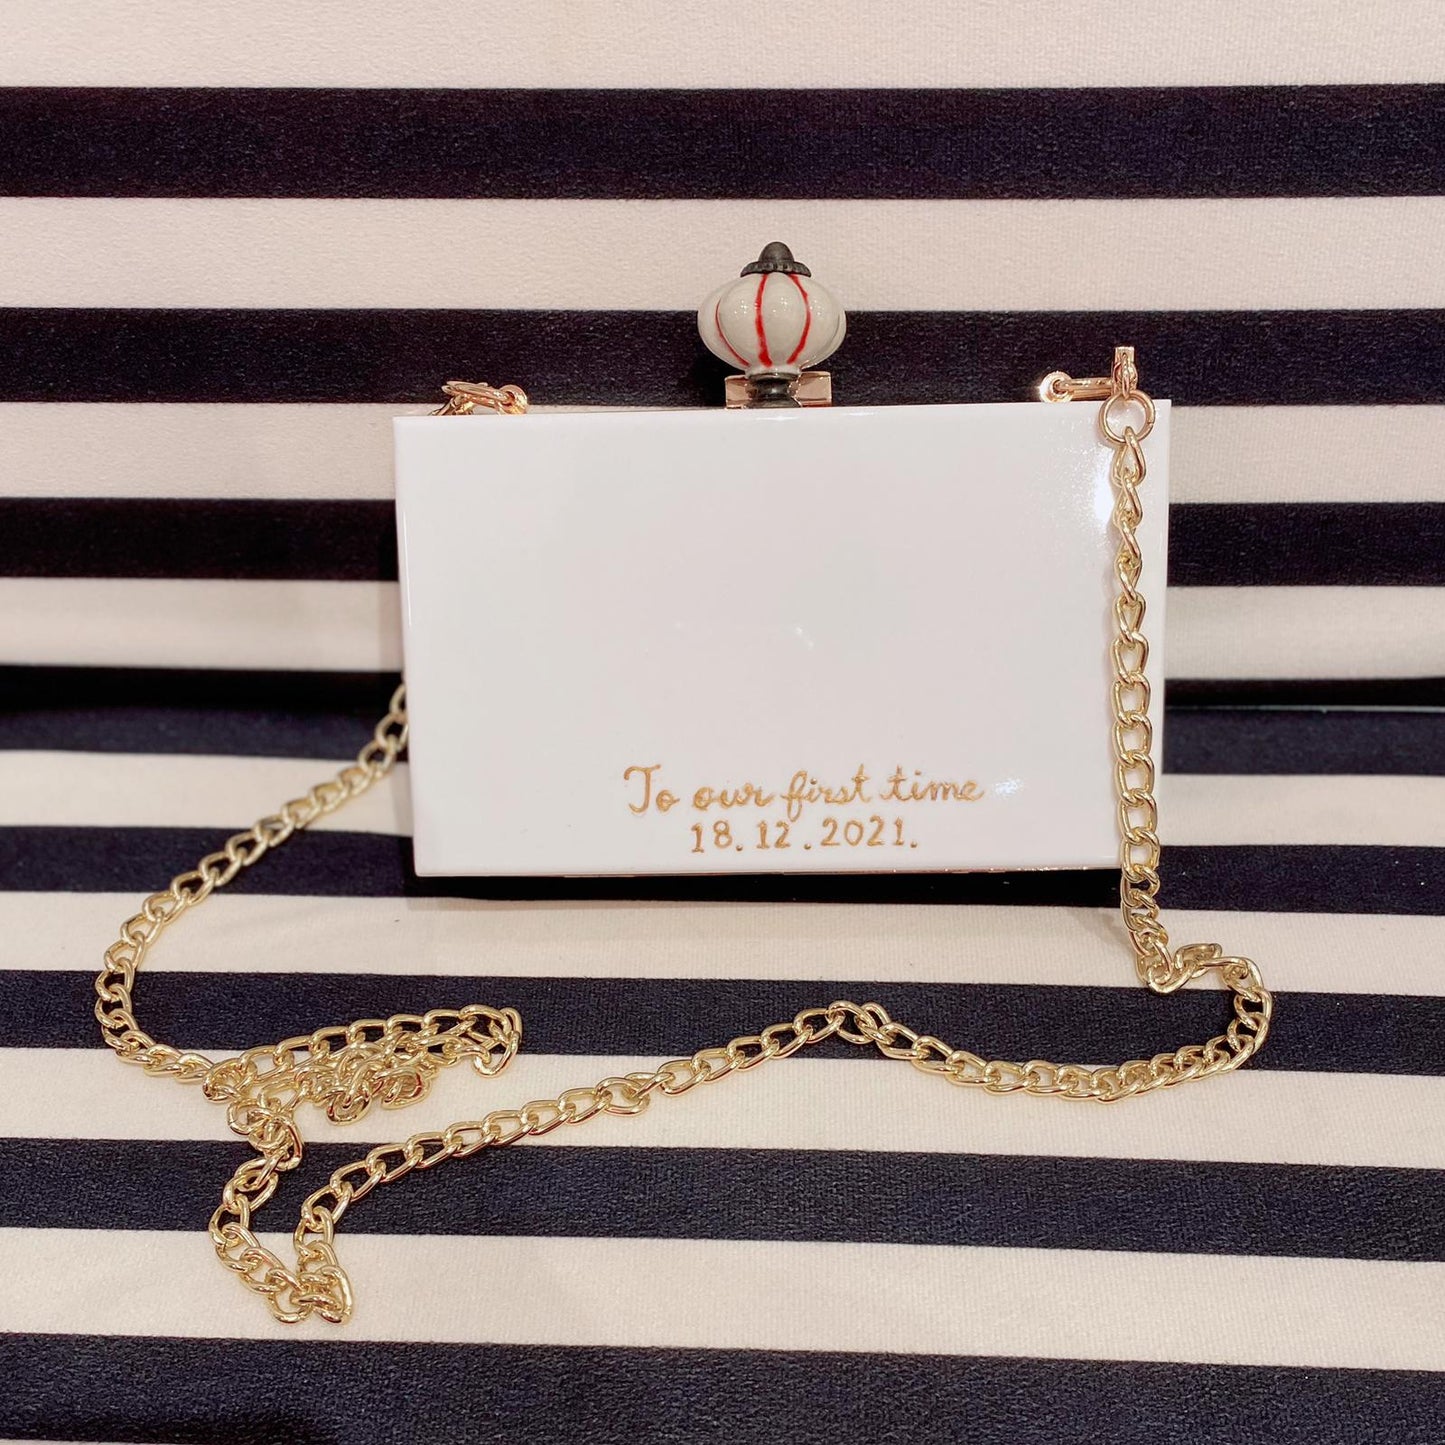 Special dates | Customise initials or dates at the back of clutch bag